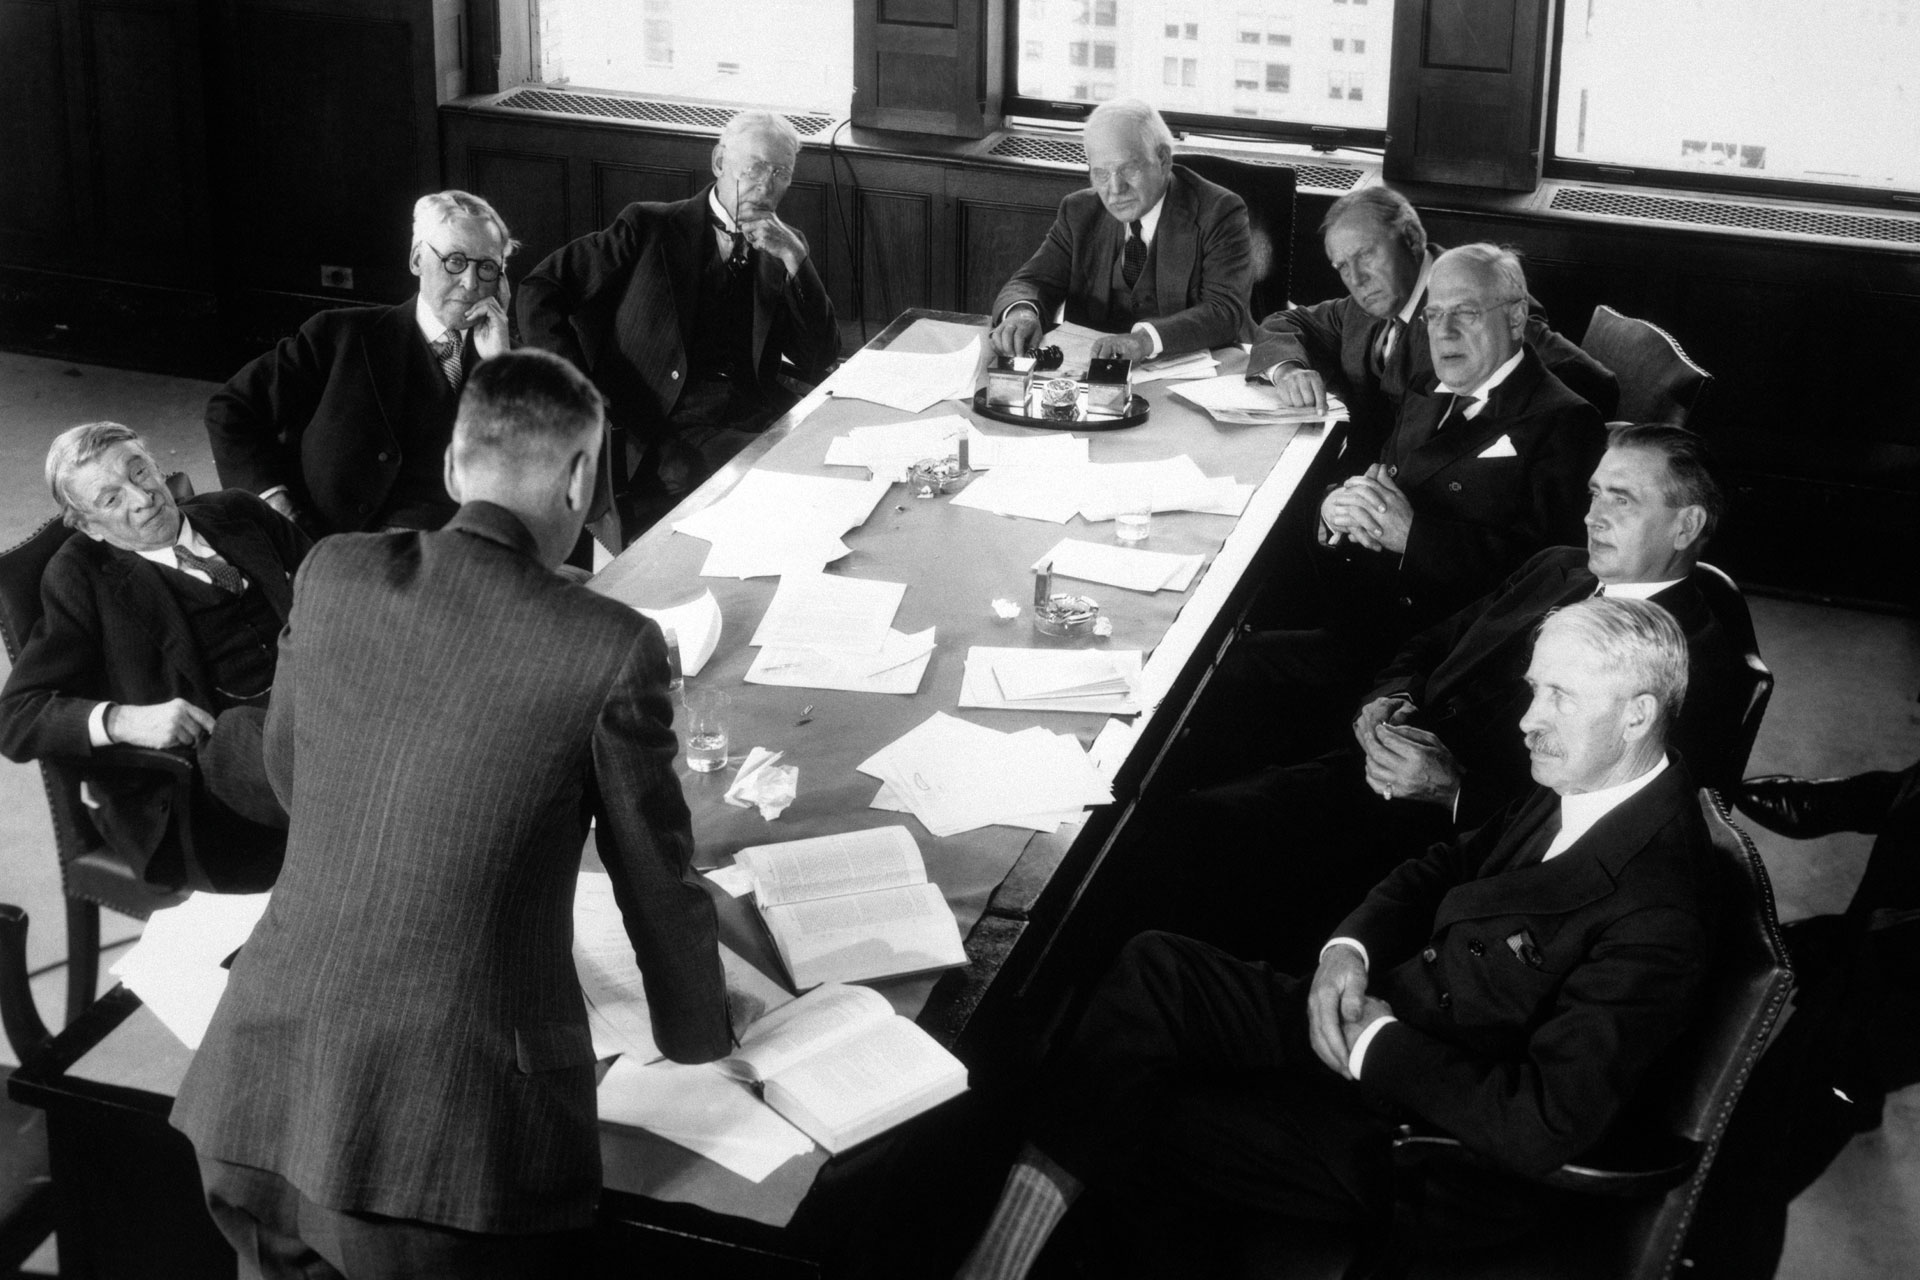 Image of men round a VC boardroom table, intended to show difficulties faced by women in founding companies in article around funding gap